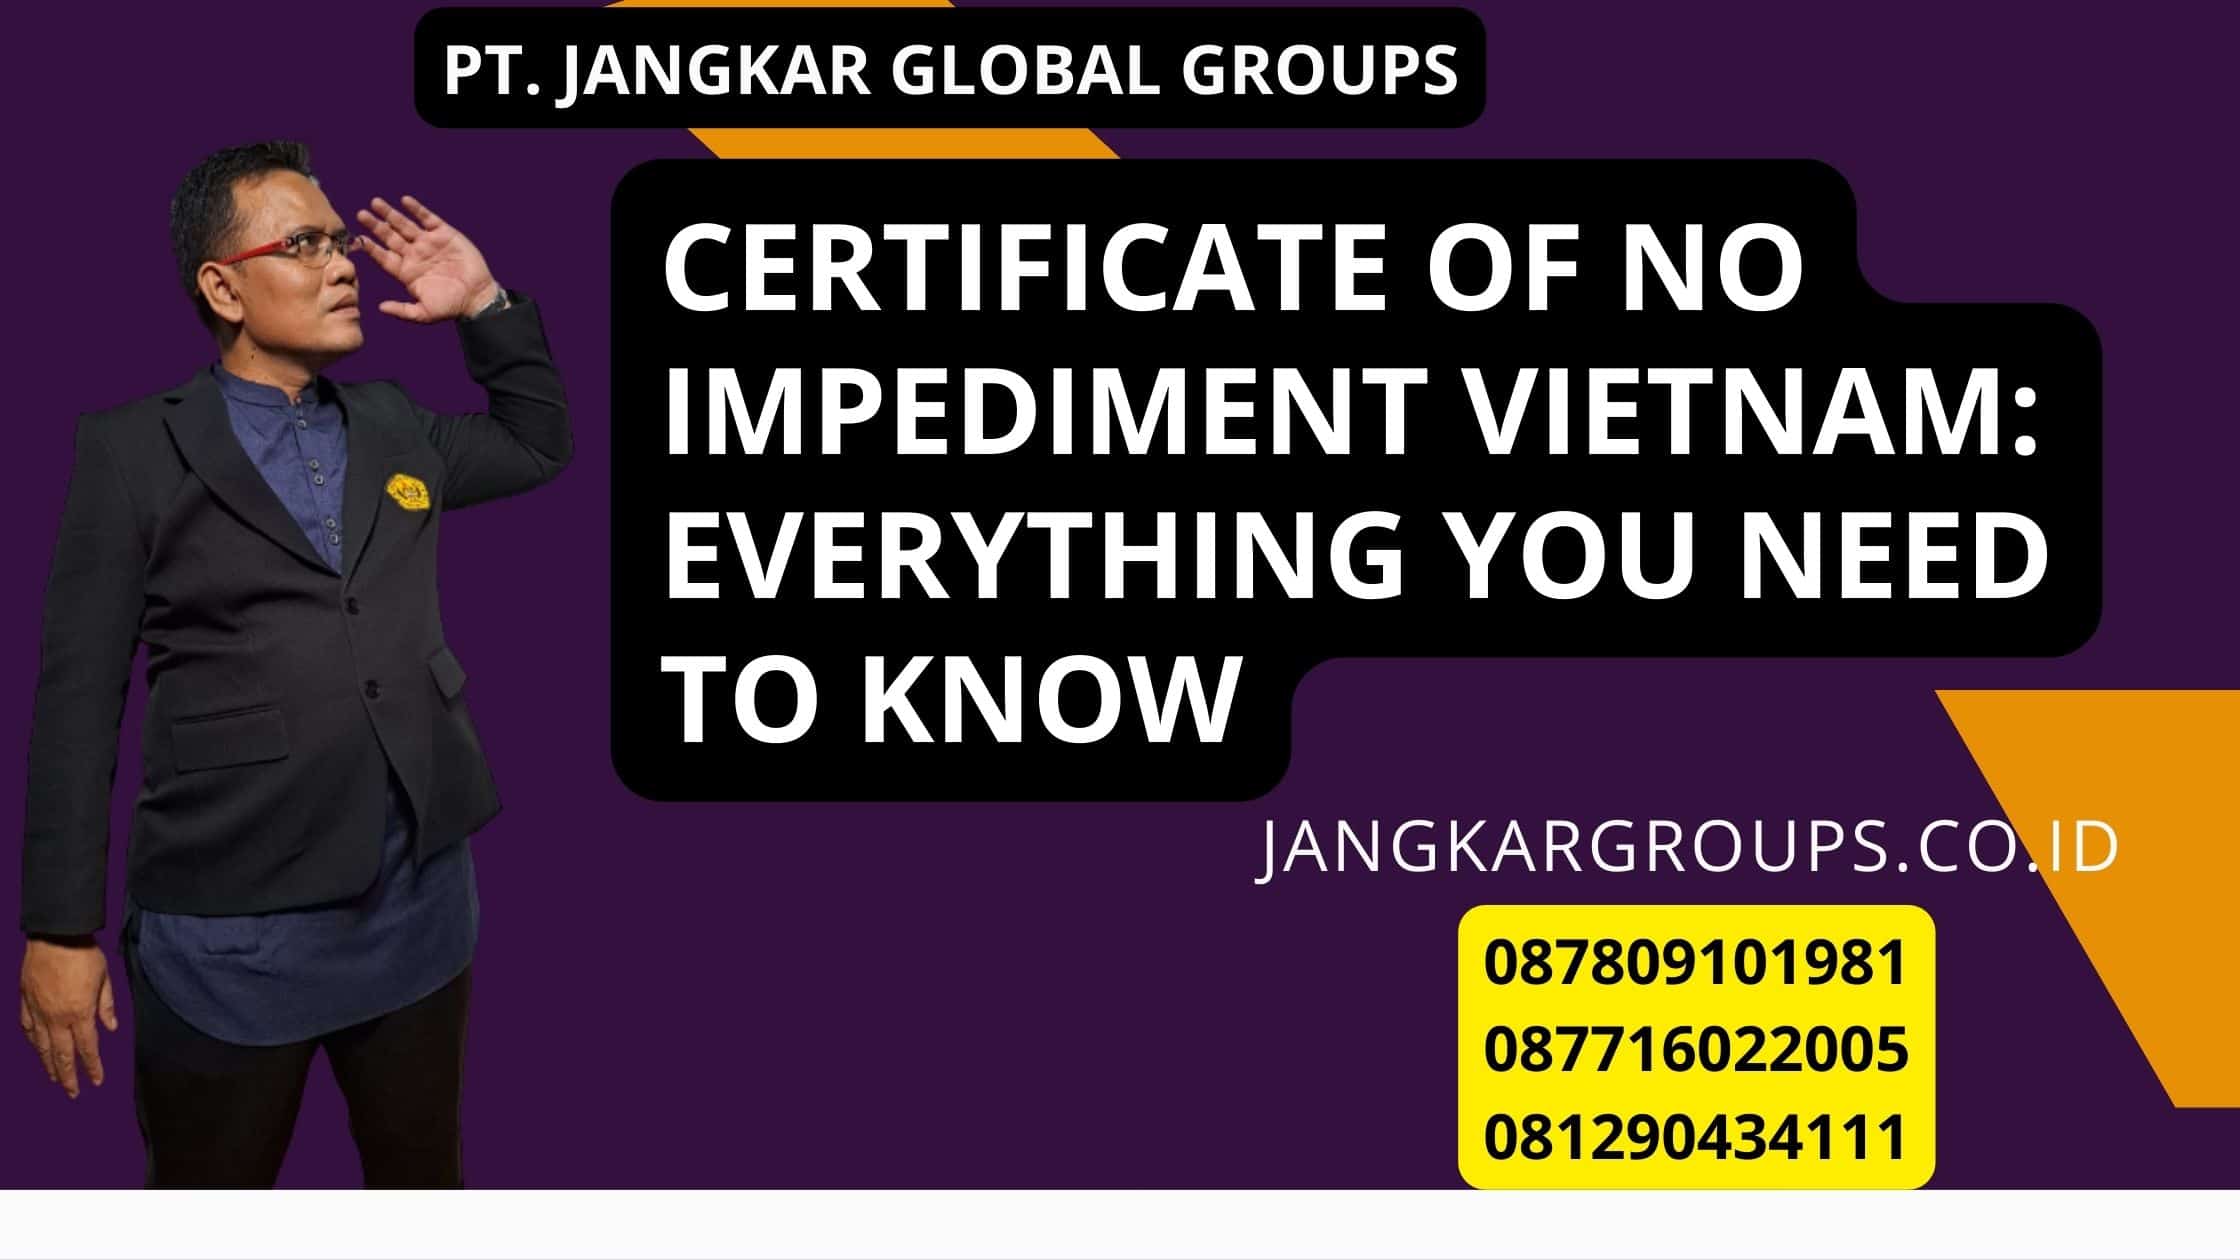 Certificate of No Impediment Vietnam: Everything You Need to Know